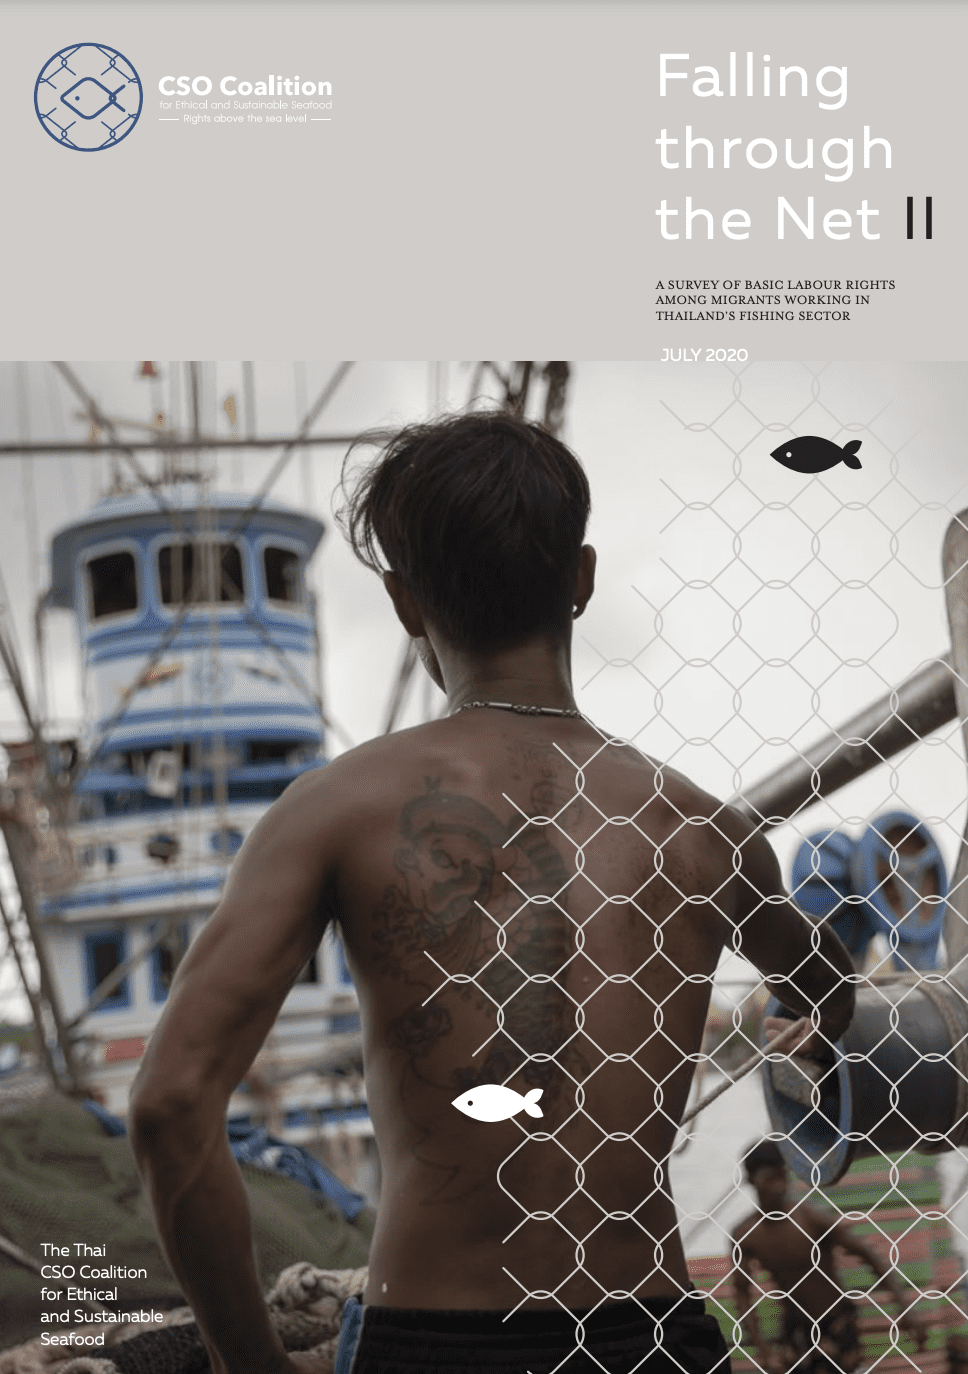 Falling Through the Net II: A Survey of Basic Labor Rights Among Migrants Working in Thailand’s Fishing Sector